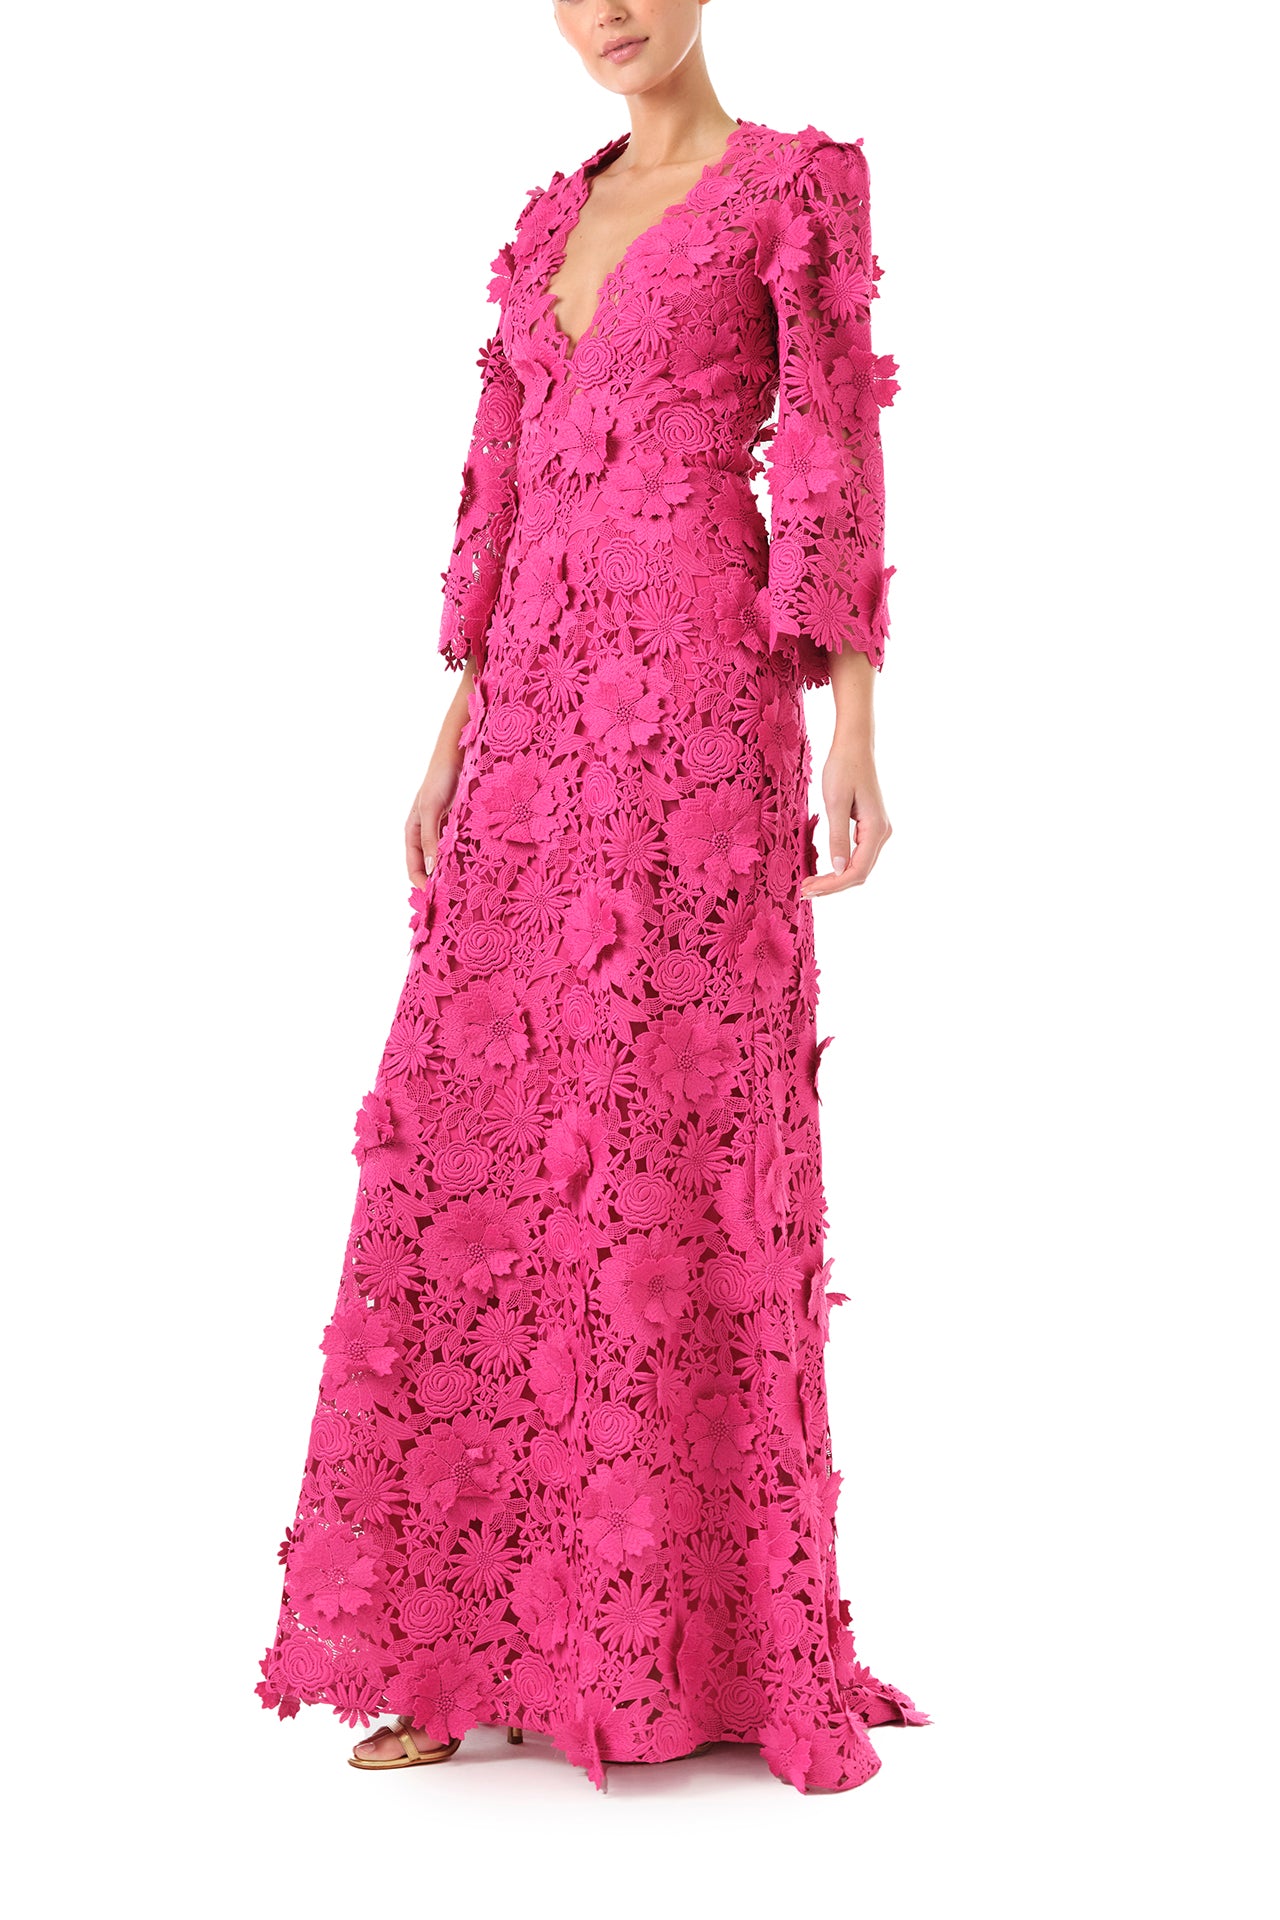 Monique Lhuillier Fall 2024 bell sleeve, floor length gown with deep v-neckline in Fuchsia 3D Guipure Lace - left side.